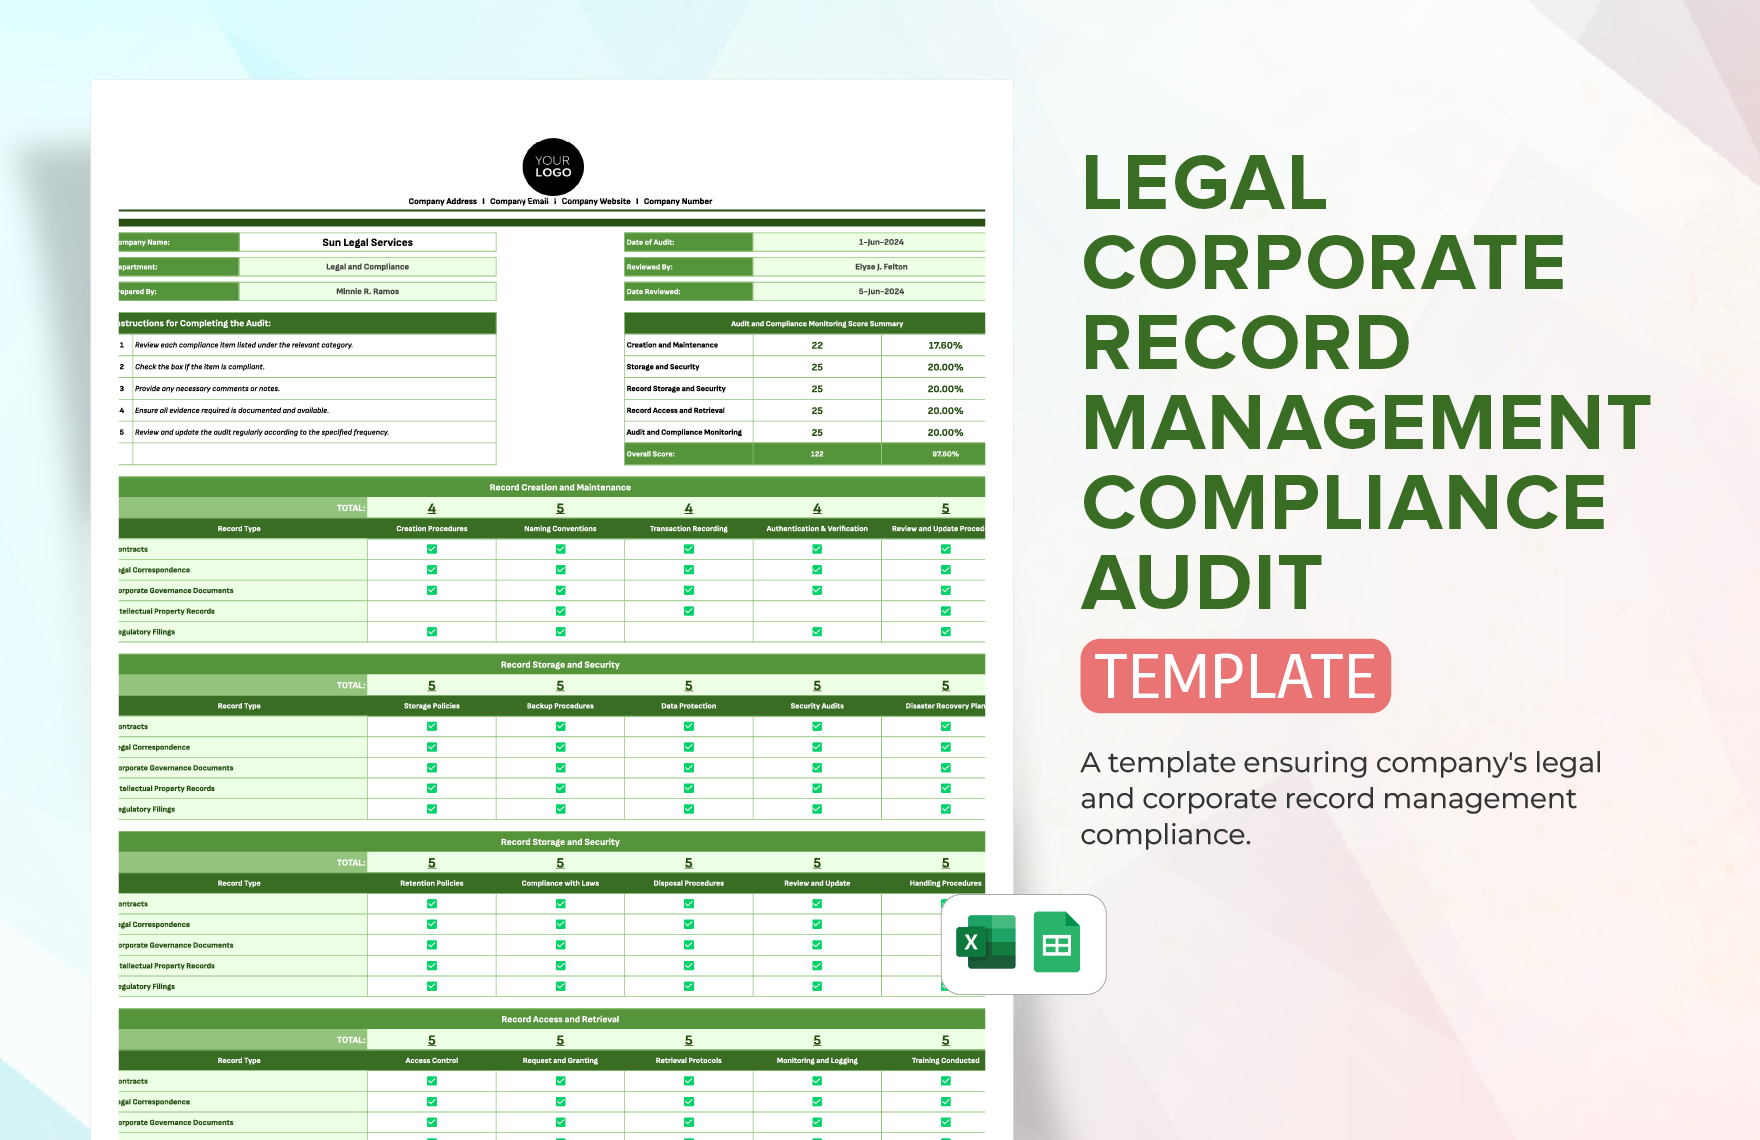 Legal Corporate Record Management Compliance Audit Template in Excel, Google Sheets